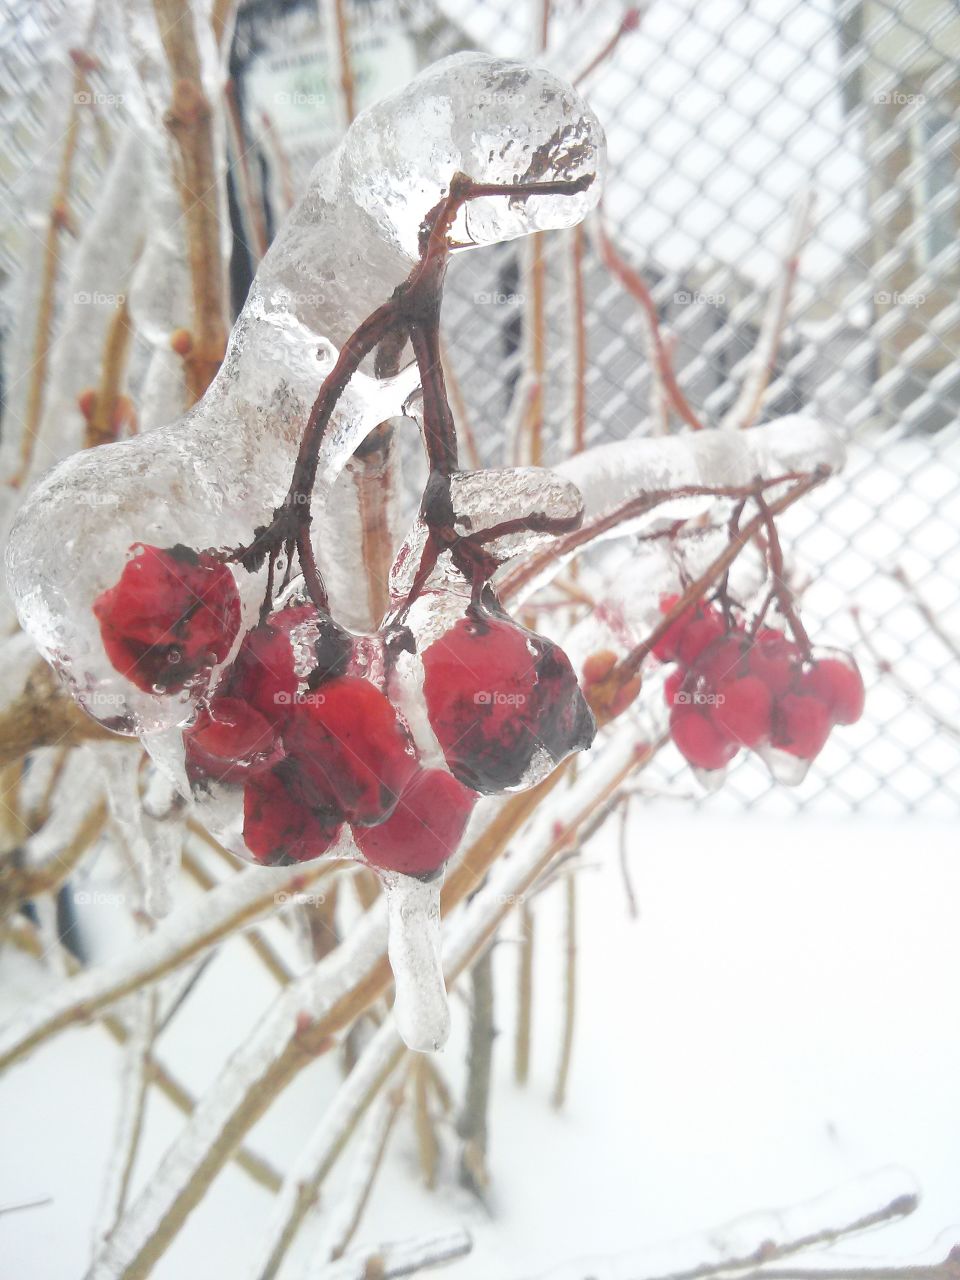 Frozen Berries. Spring seems to be delayed in Canada. Berries coated in thick ice after a deep freeze.